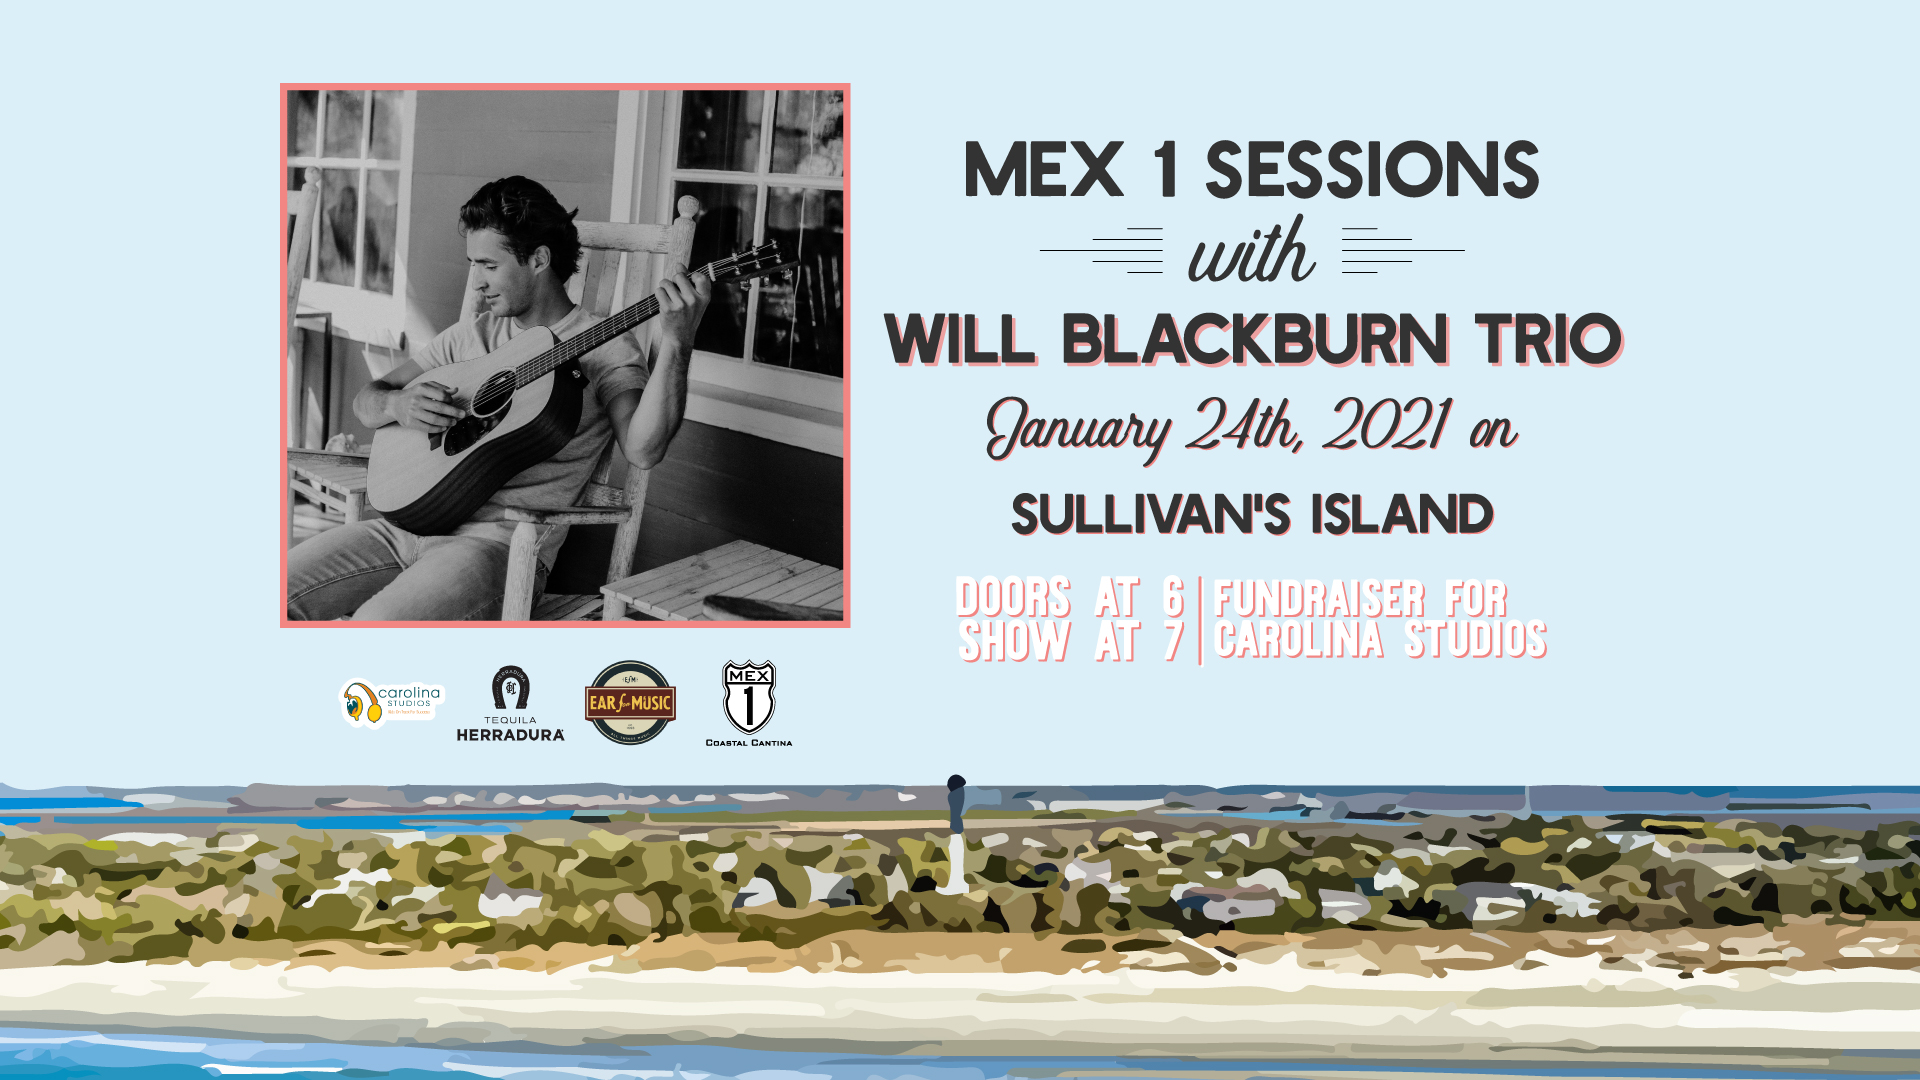 Live Music poster for our Mex 1 Sessions with Will Blackburn Trio on Sunday, January 24th at 7pm